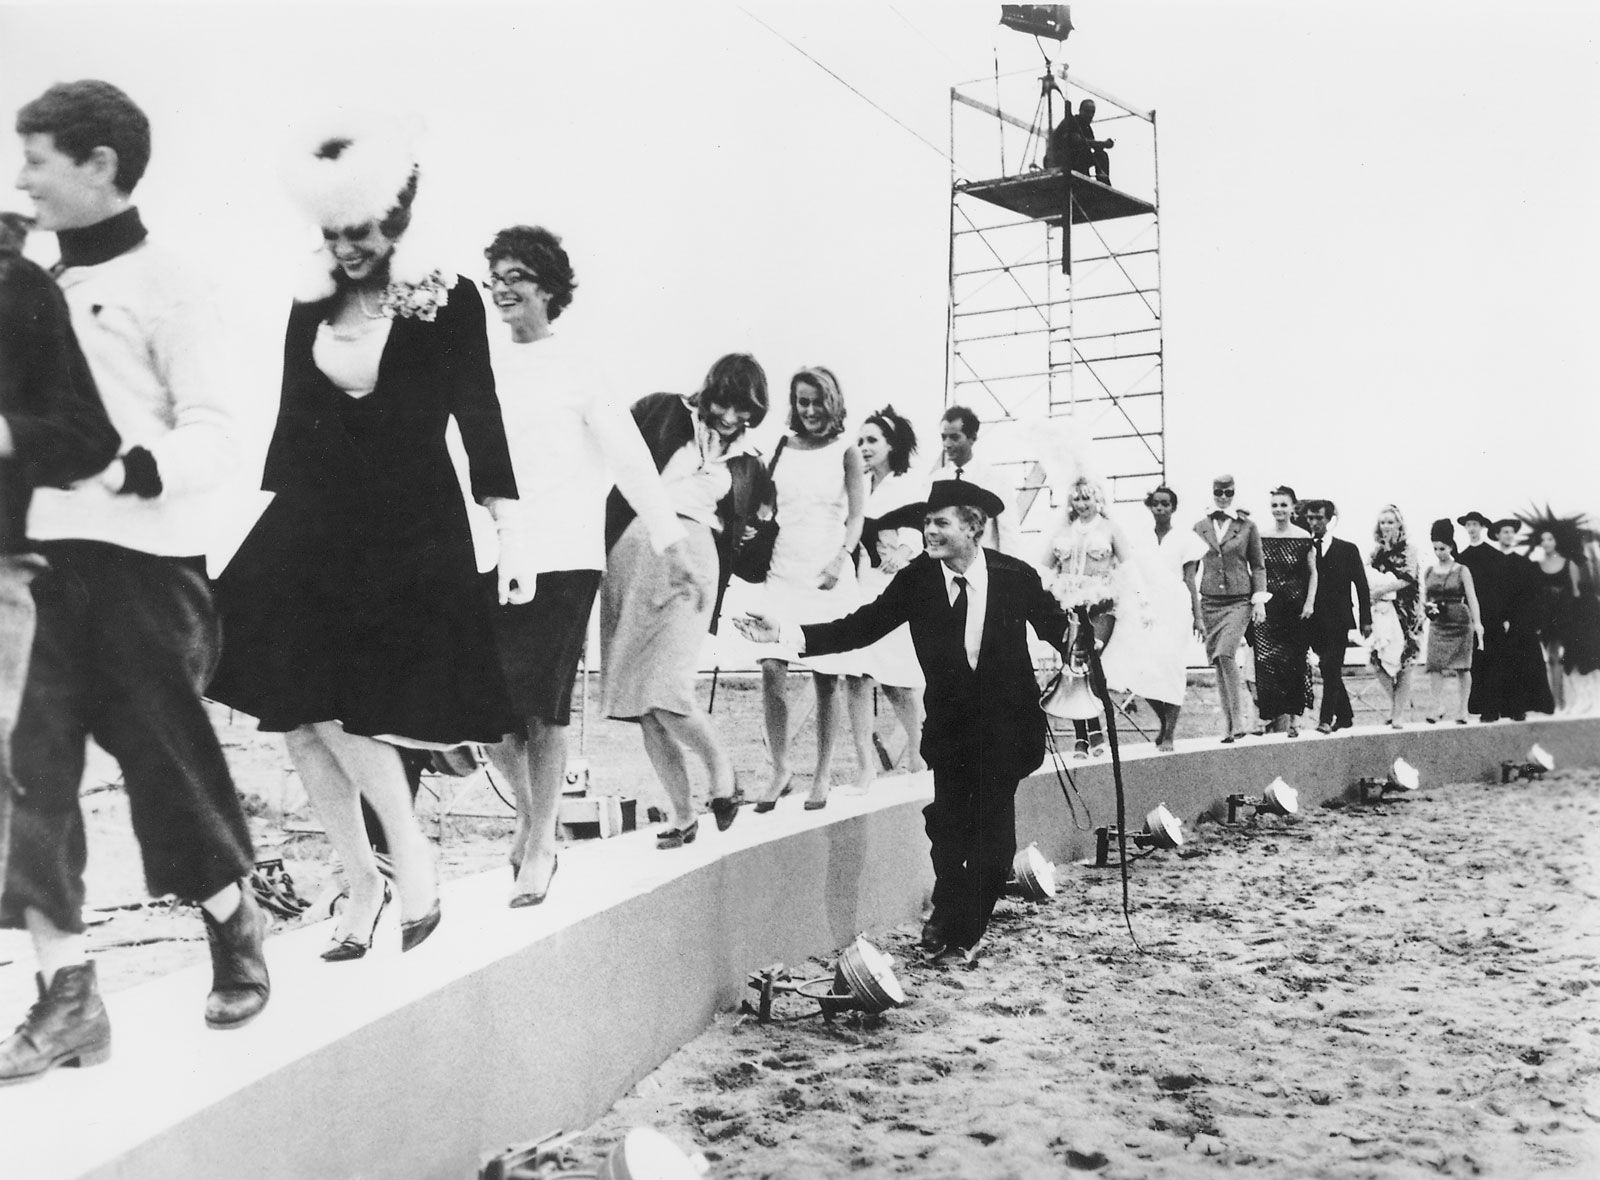 Federico Fellini. Biography, Movies, Assessment, & Facts